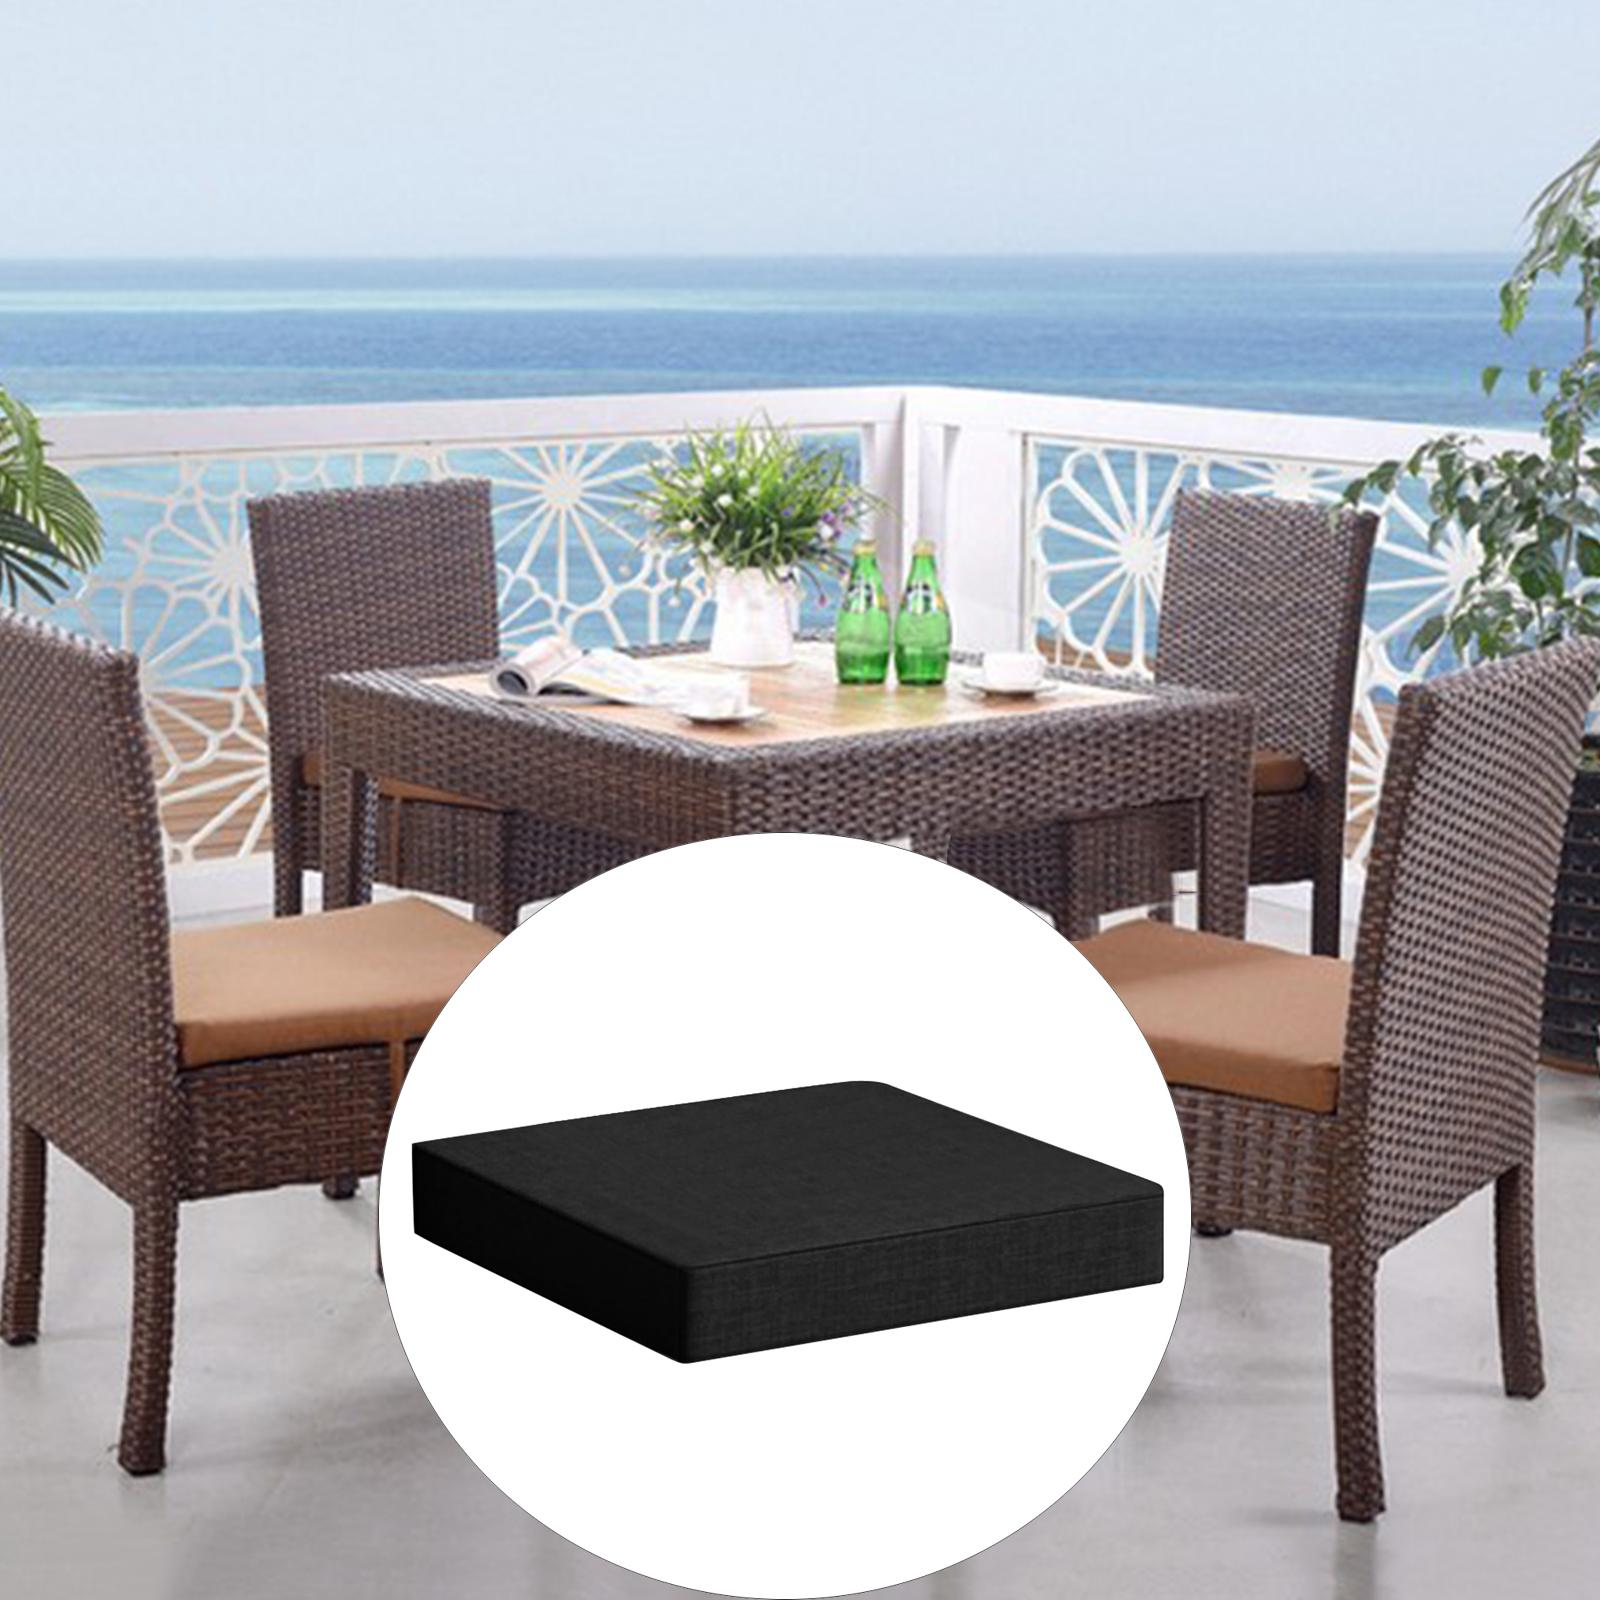 Seat Pads Cushion ,Waterproof Chair Cushions Garden Cushion,Furniture Seat Pads Cushion Pad Indoors Outdoors,Garden Seat Pads Cushion Memory Foam for chairs,Outdoor Office Garden Black - image 5 of 6